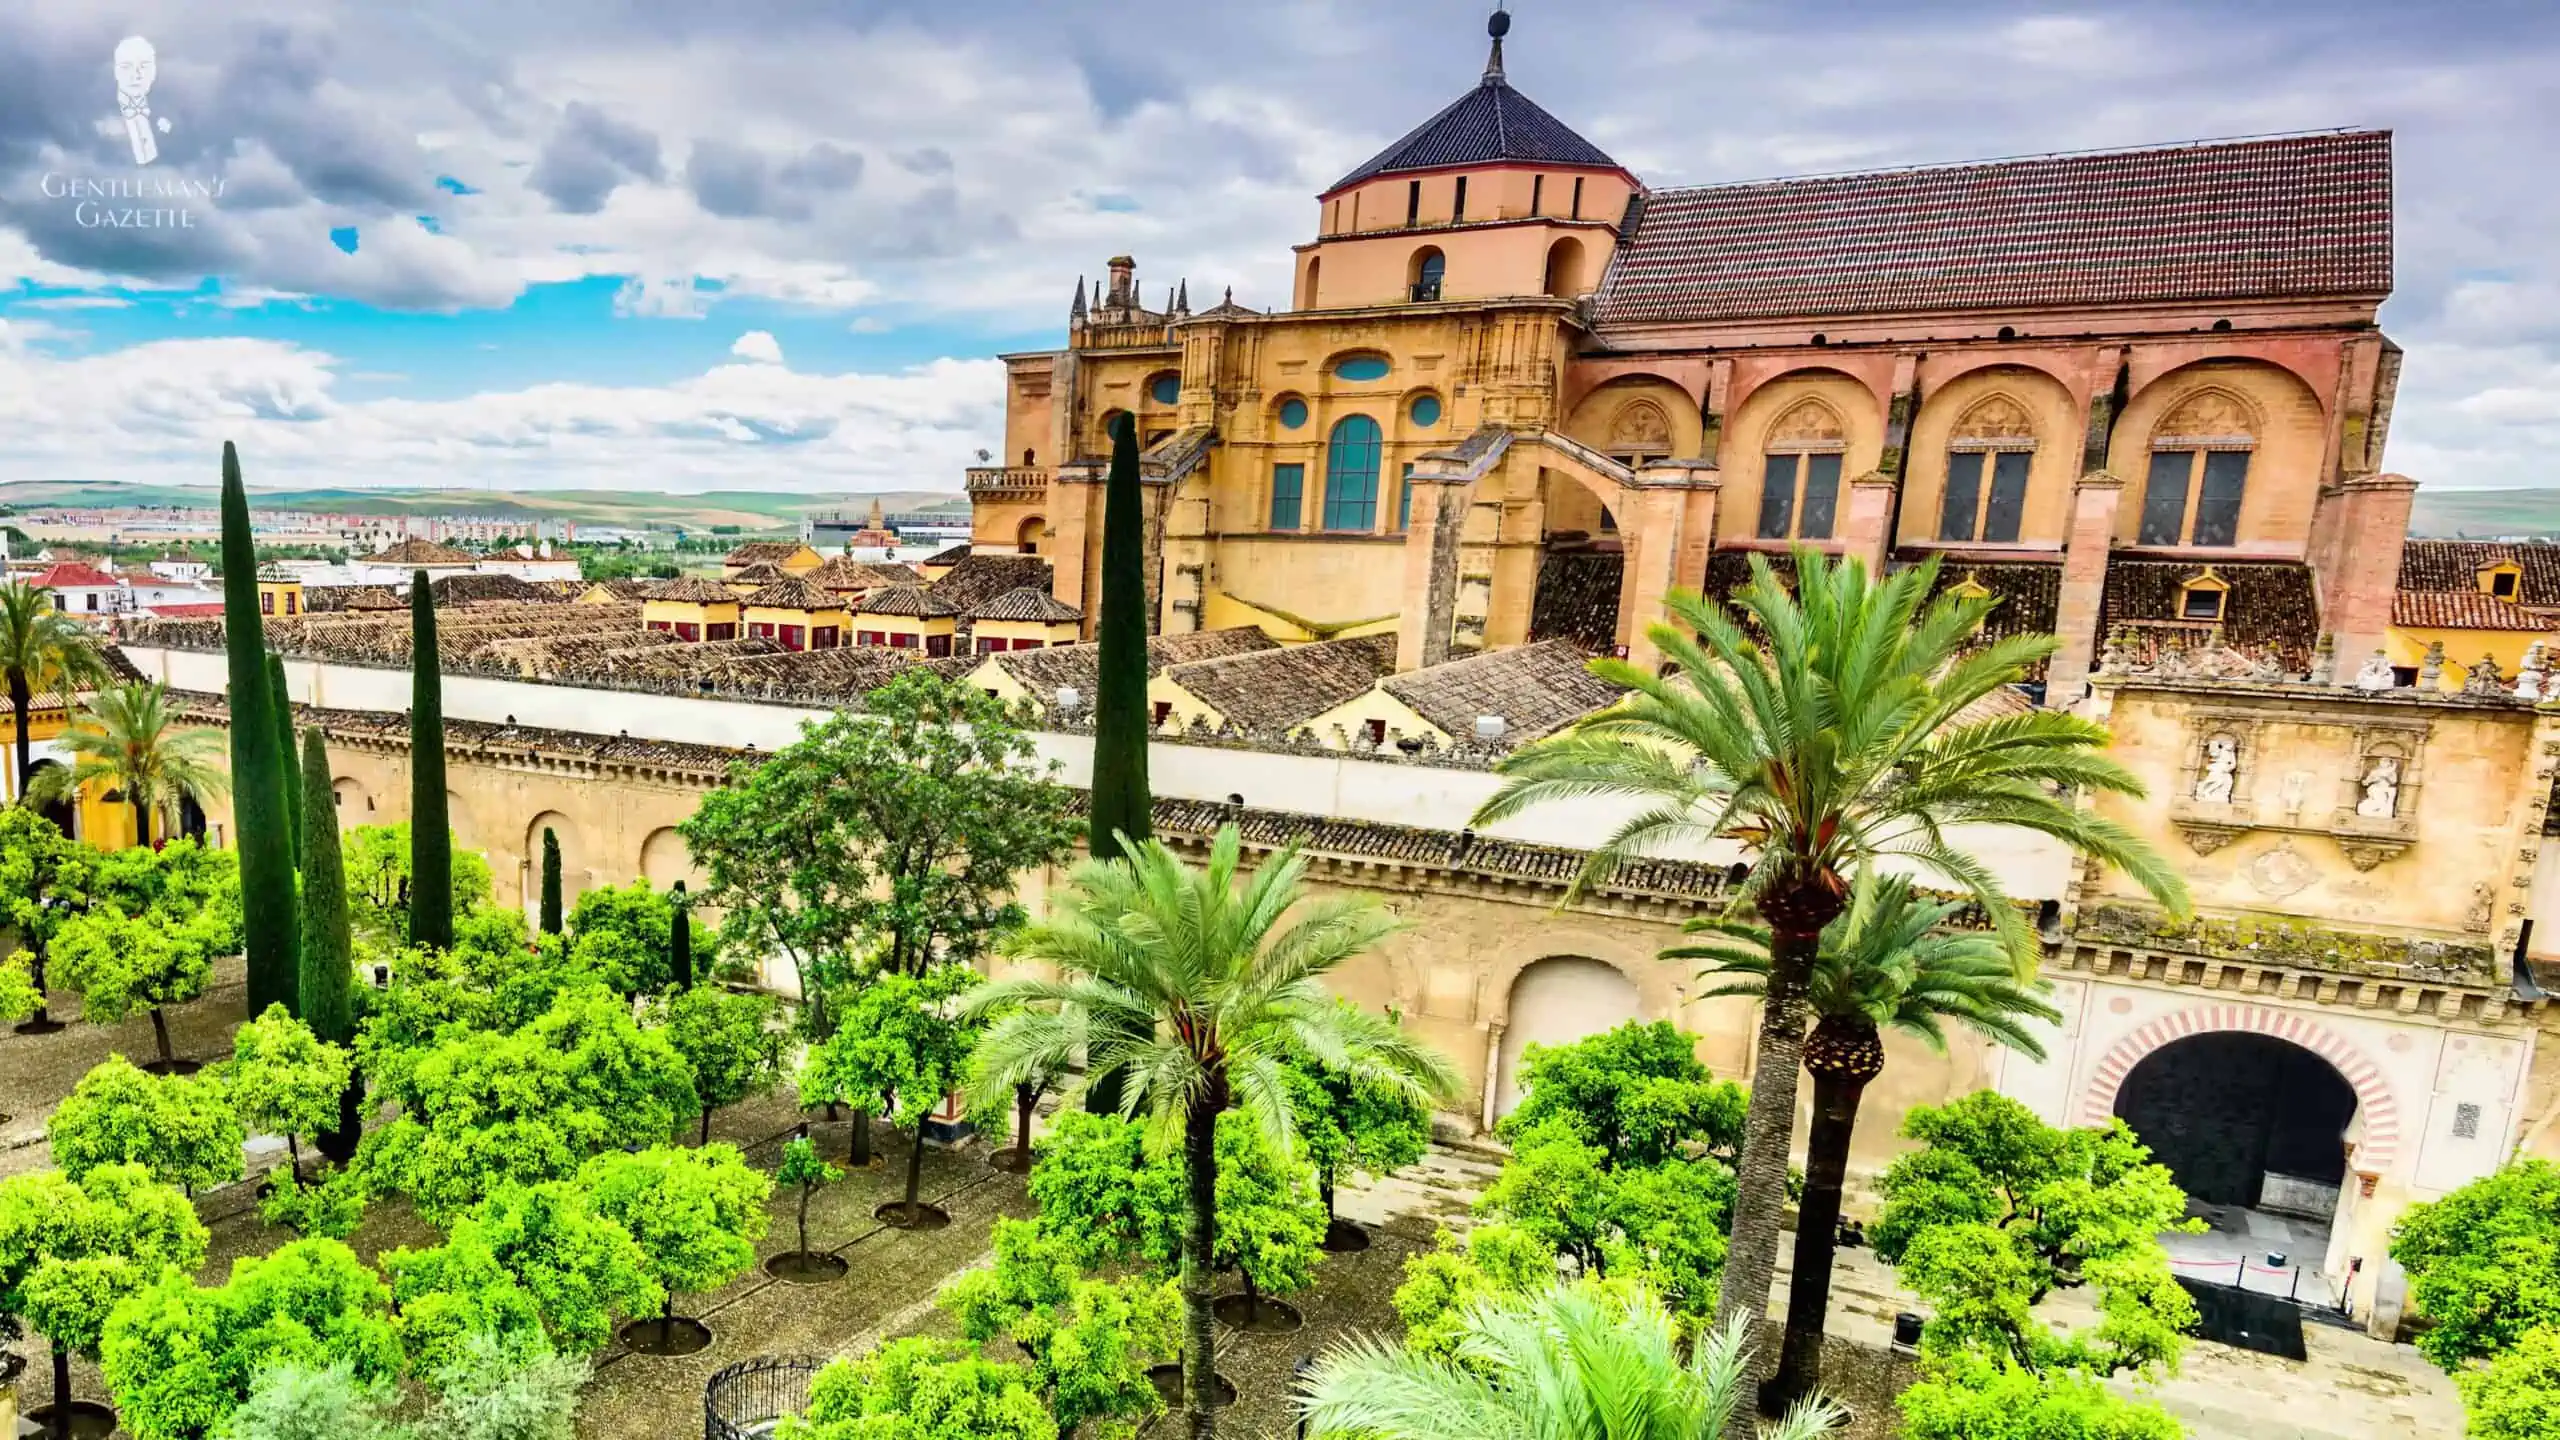 The term "cordovan" is derived from the Spanish city of Córdoba